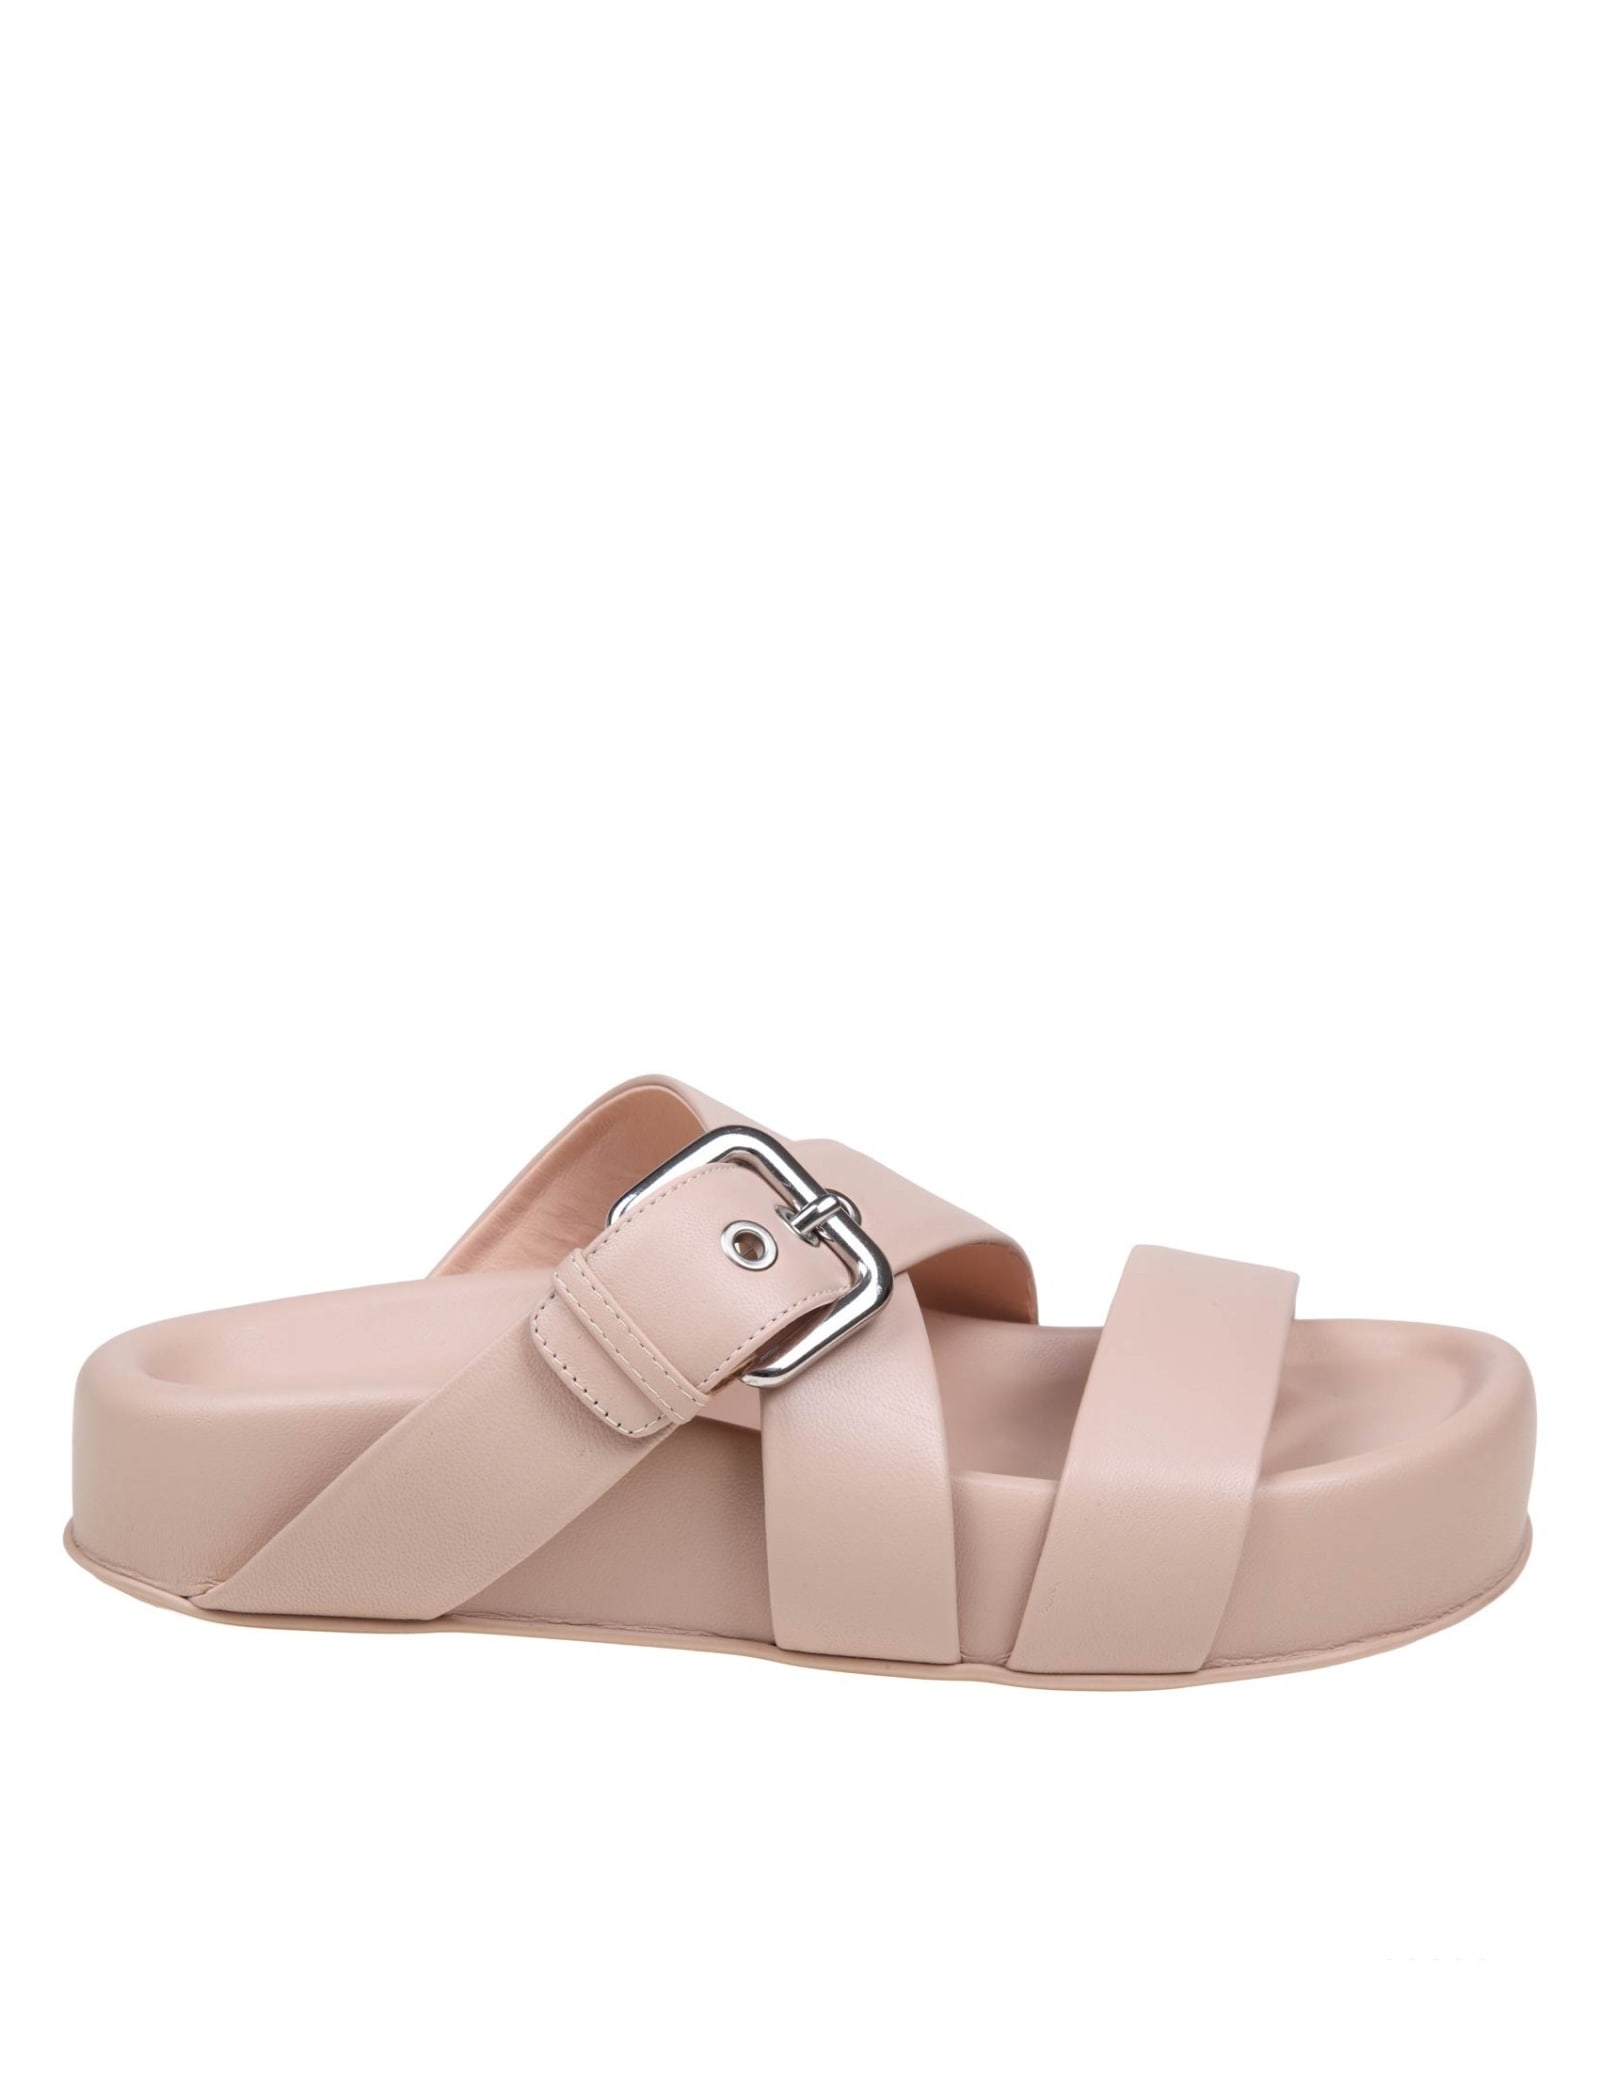 agl jane slides in nude leather